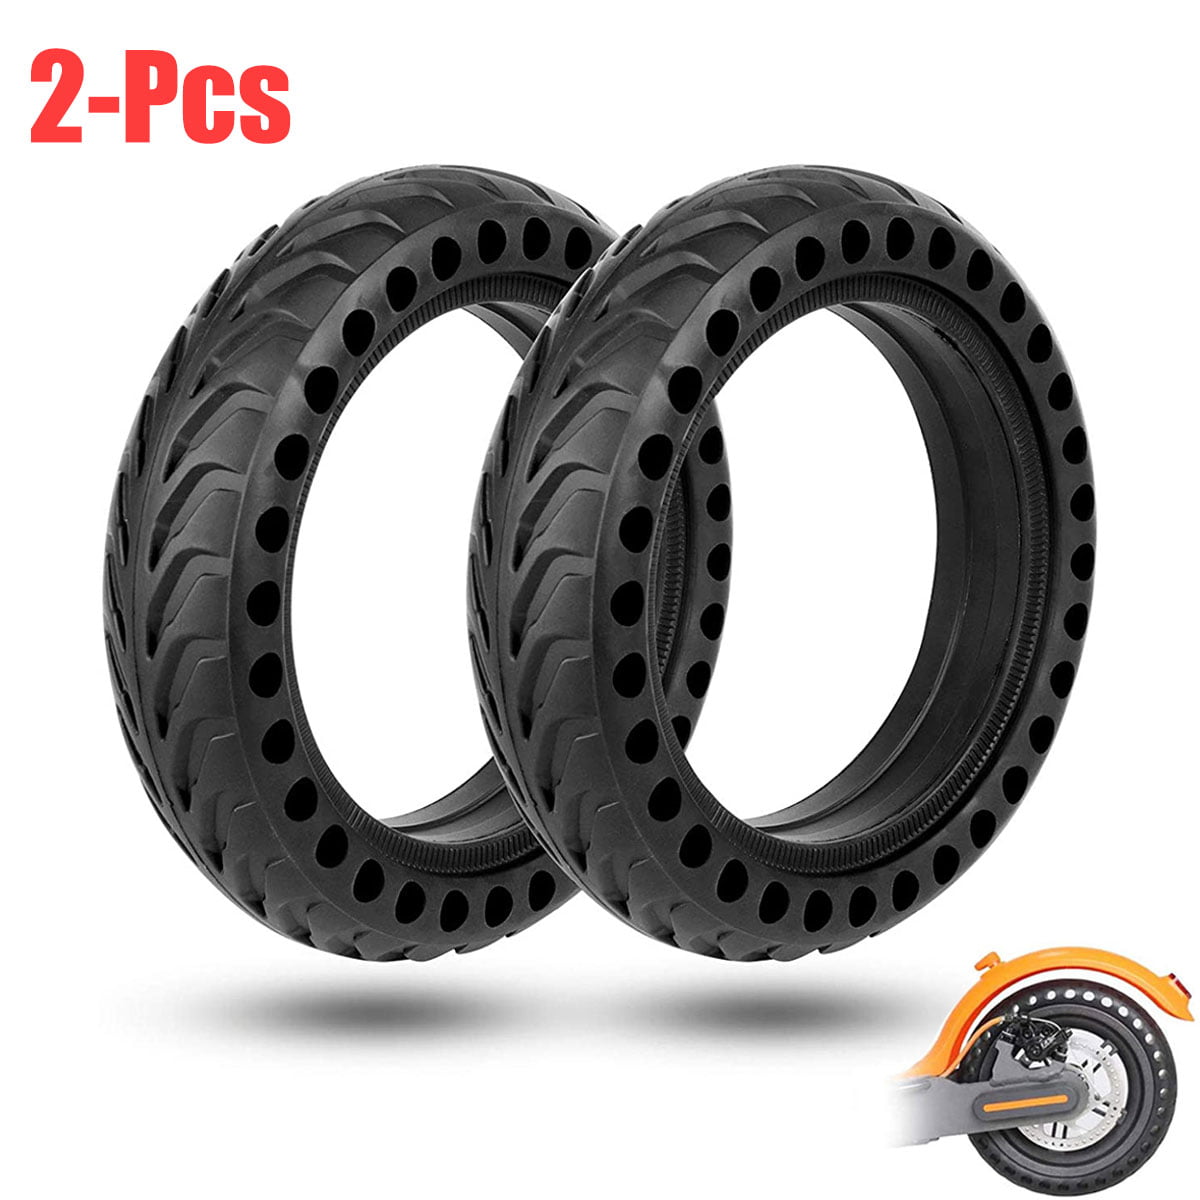 Excellent Shock Performance Bouanq Electric Scooter Tires Nti-Slip Surface Solid Tires Wheel Explosion-Proof Tire Replace for Xiaomi Mijia M365 Electric Scooter 